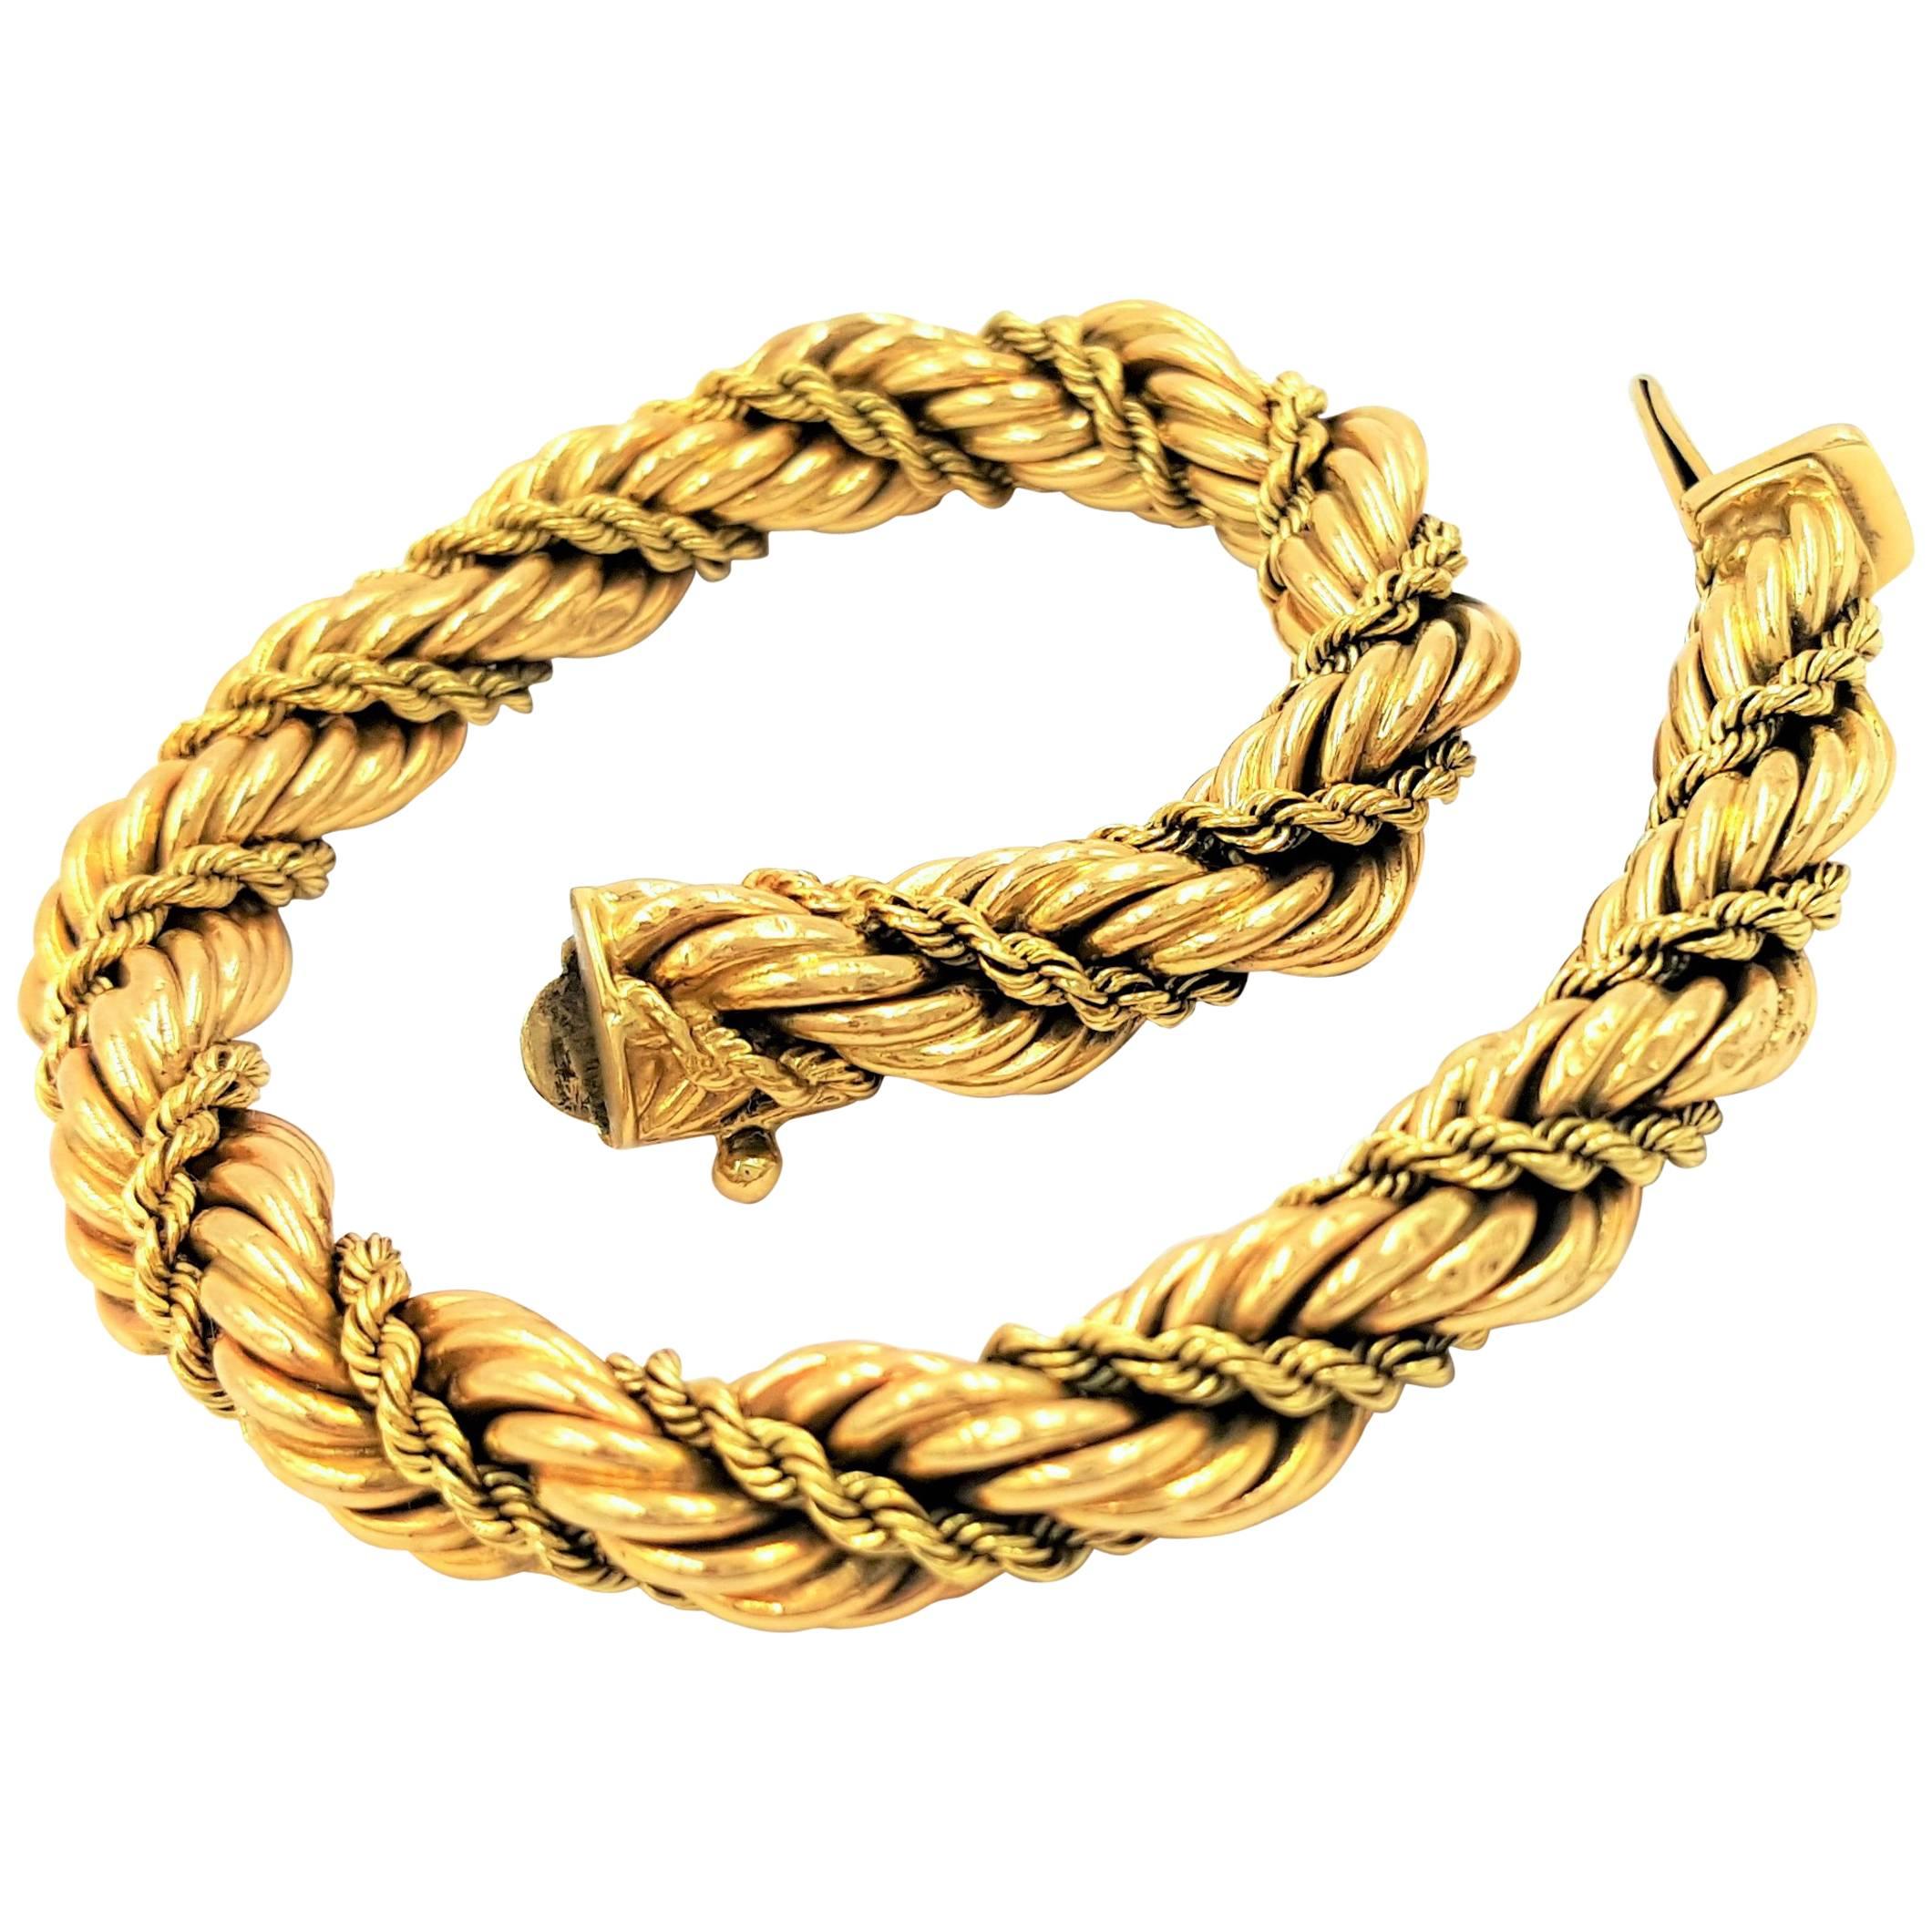 Tiffany & Co. Golden Light Collection Twisted Gold Rope Bracelet For Sale